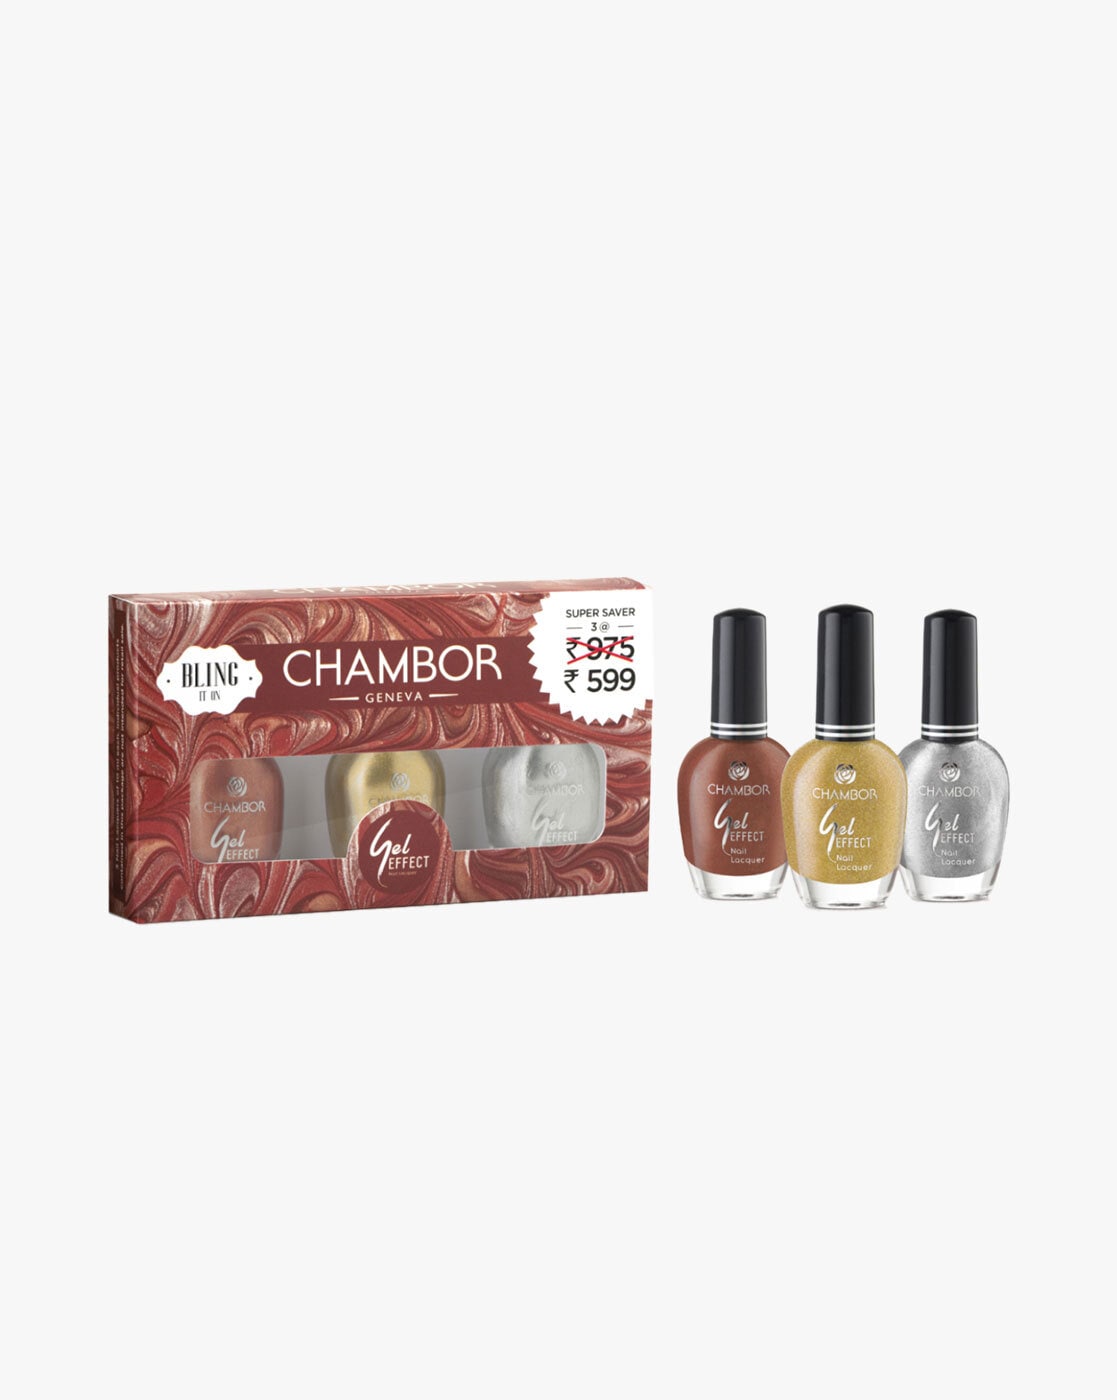 Chambor Gel Effect Nail Lacquer - #605